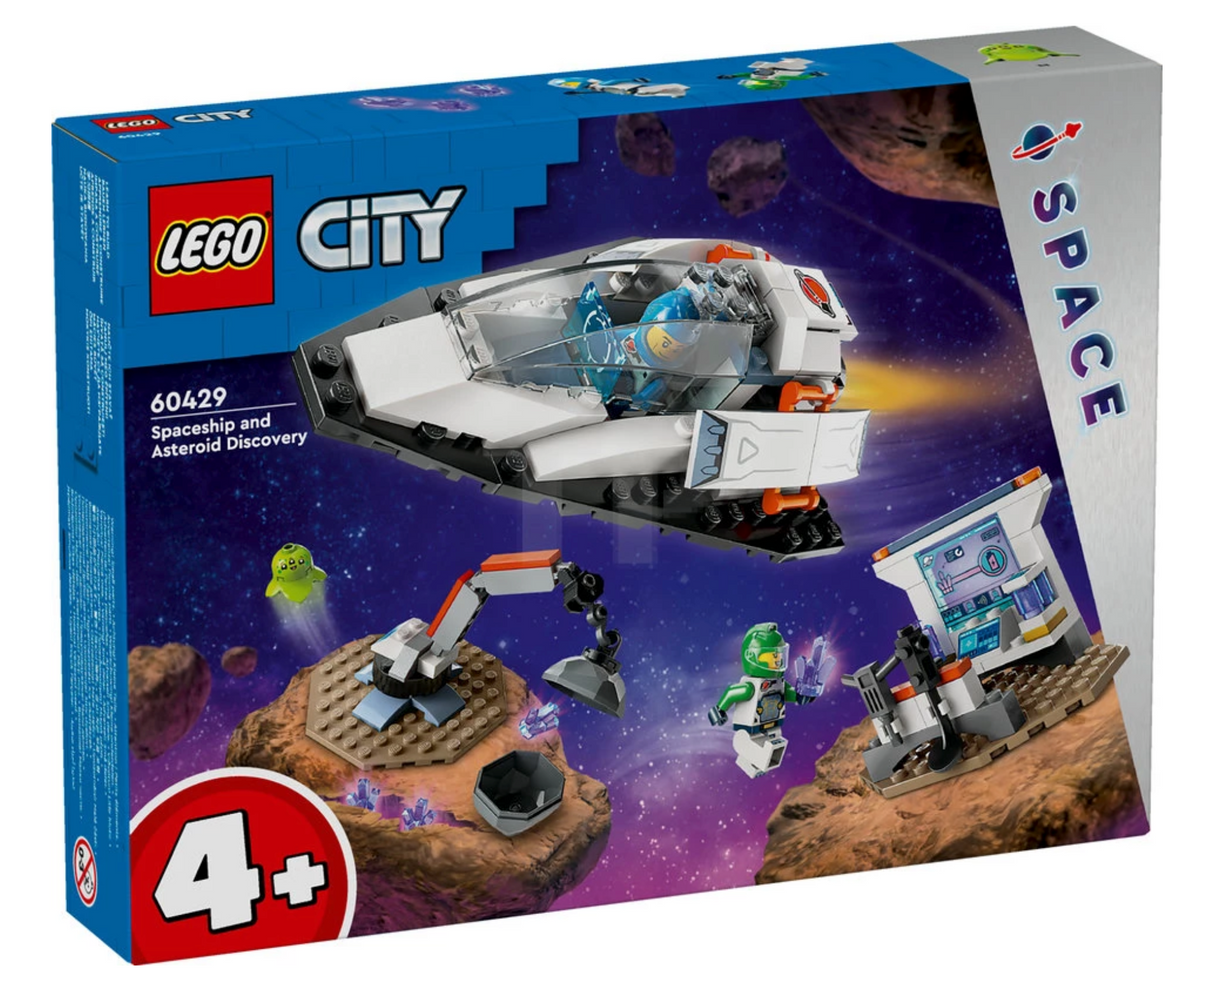 City Spaceship and Asteroid Discovery